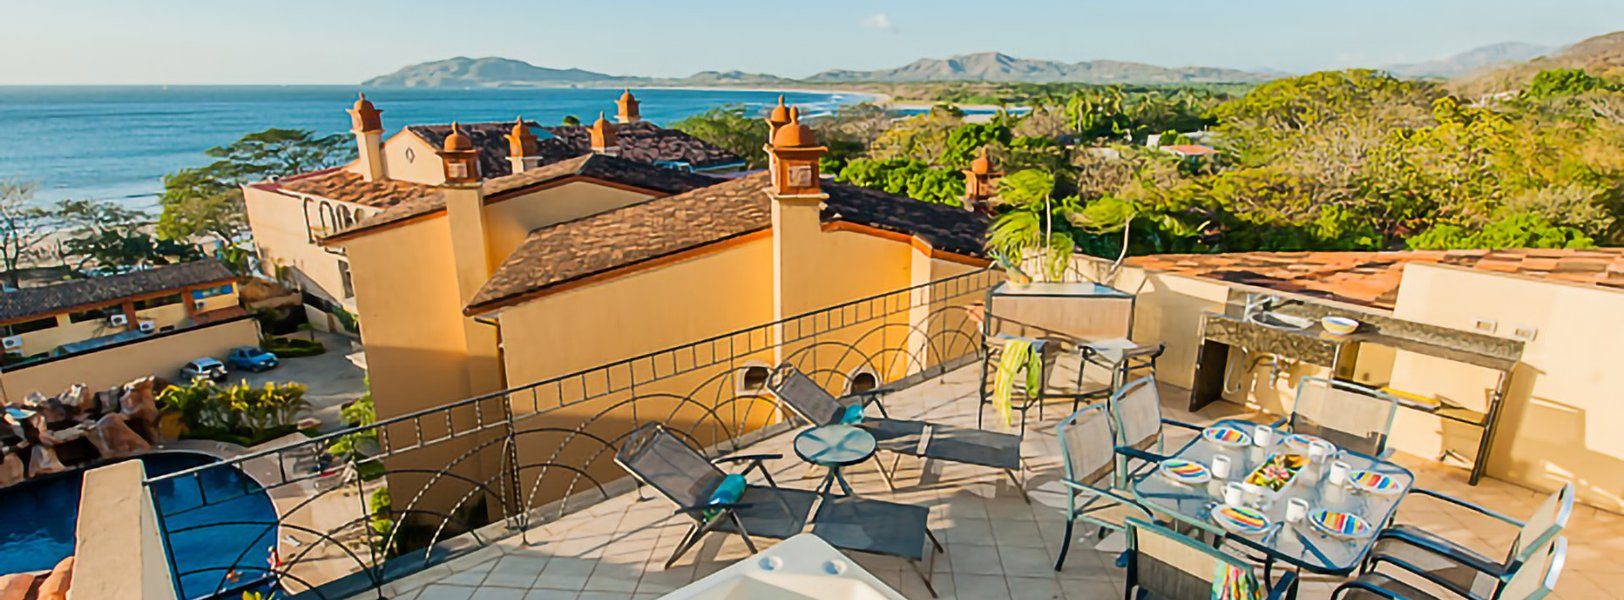 The gorgeous ocean views from your private terrace are some of the best in Guanacaste.